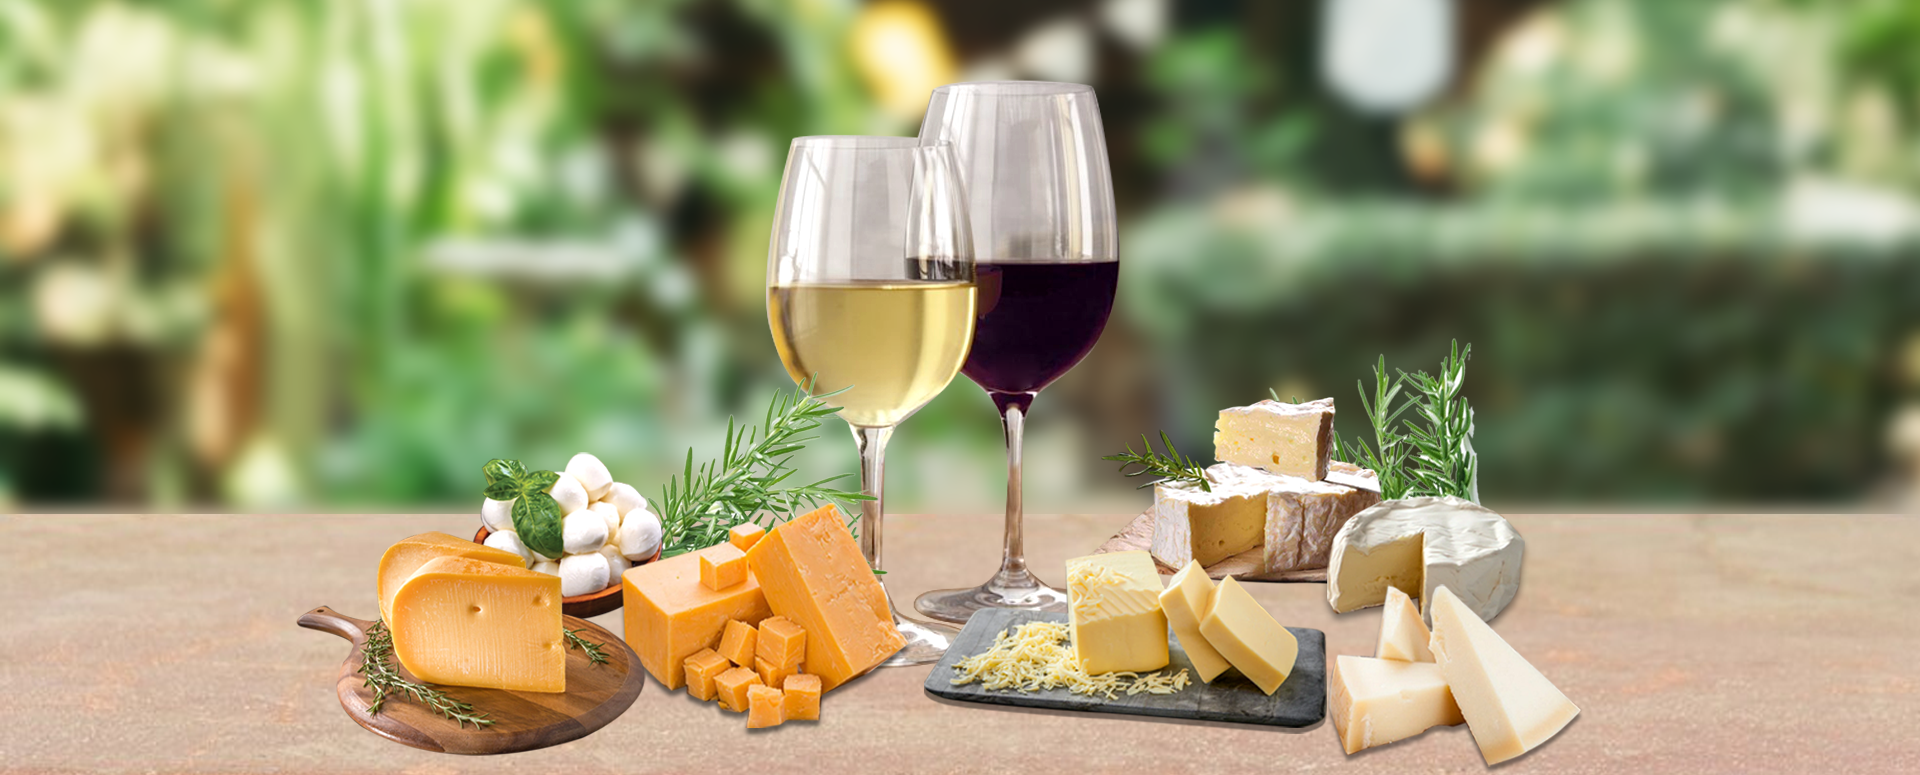 WINE AND CHEESE PAIRING RECOMMENDATION BY RED APRON'S SOMMELIER